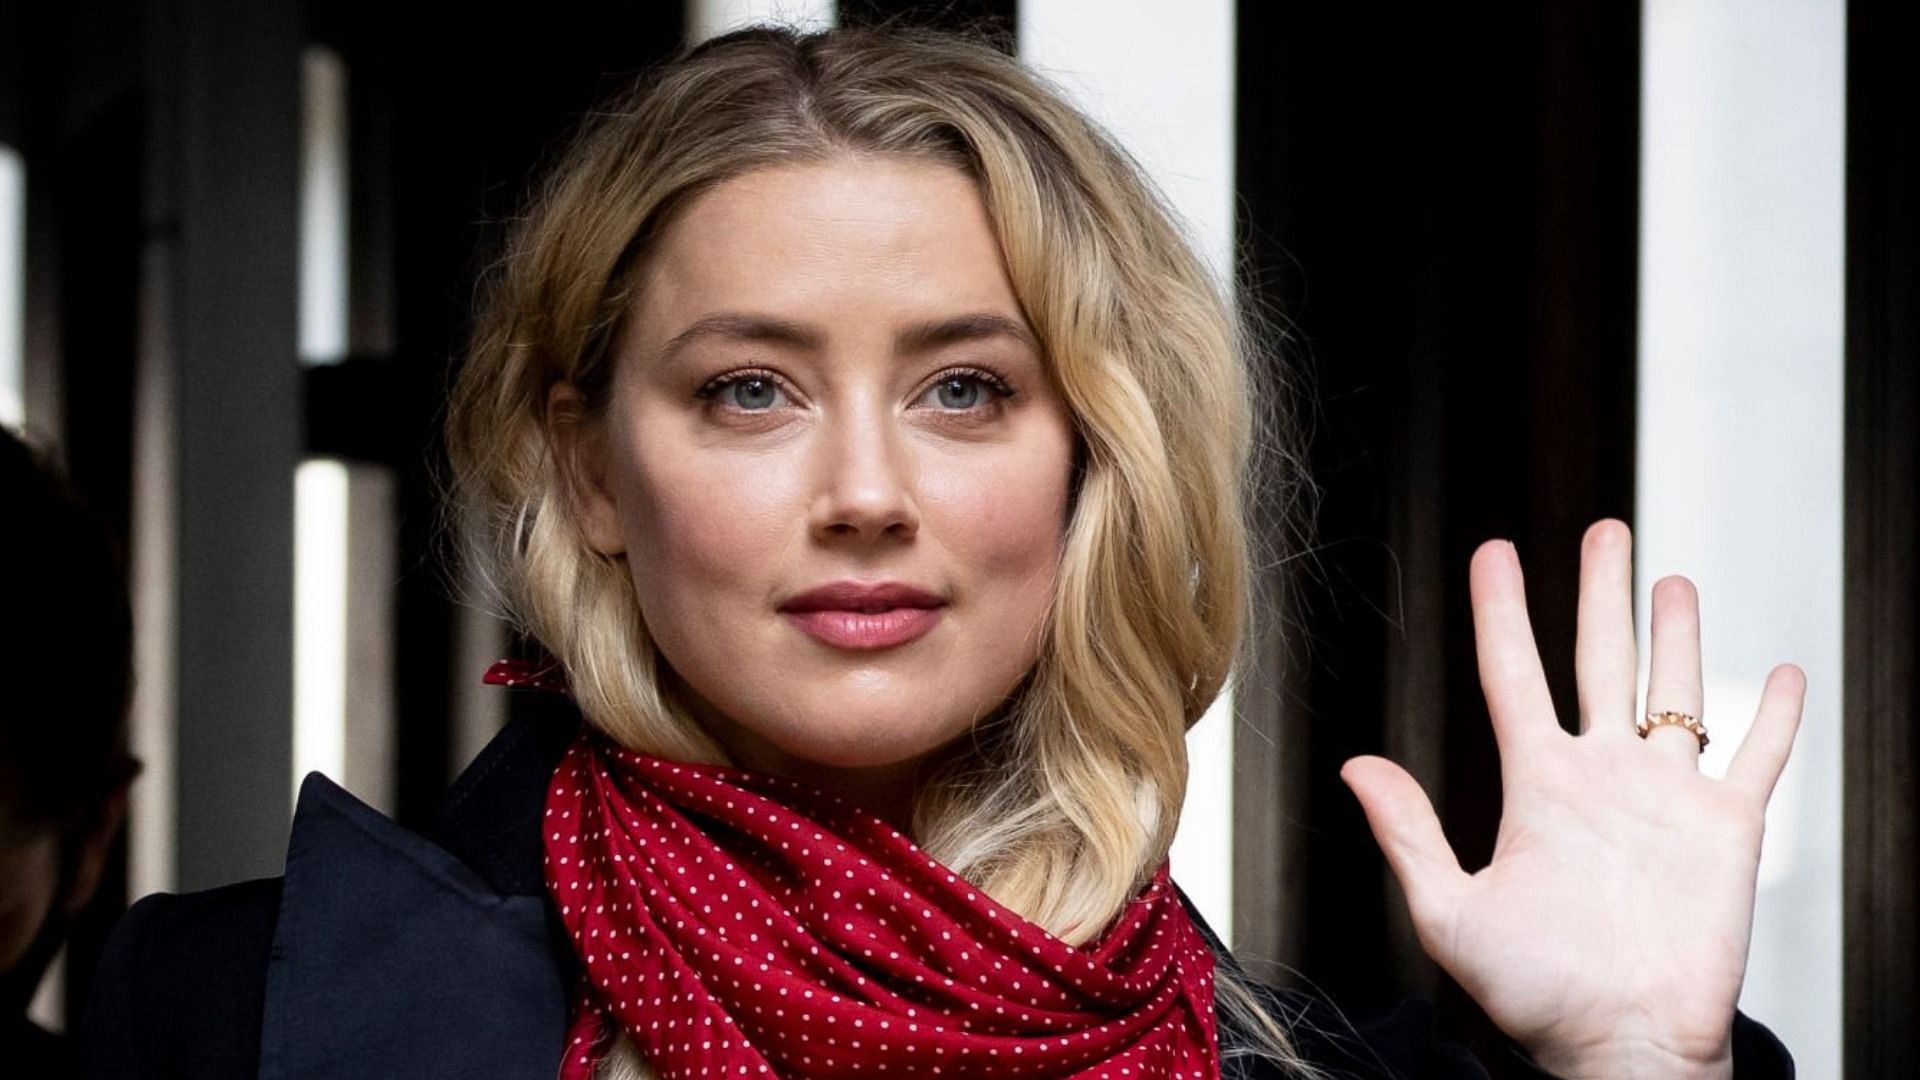 Amber Heard (Image via Getty Images)